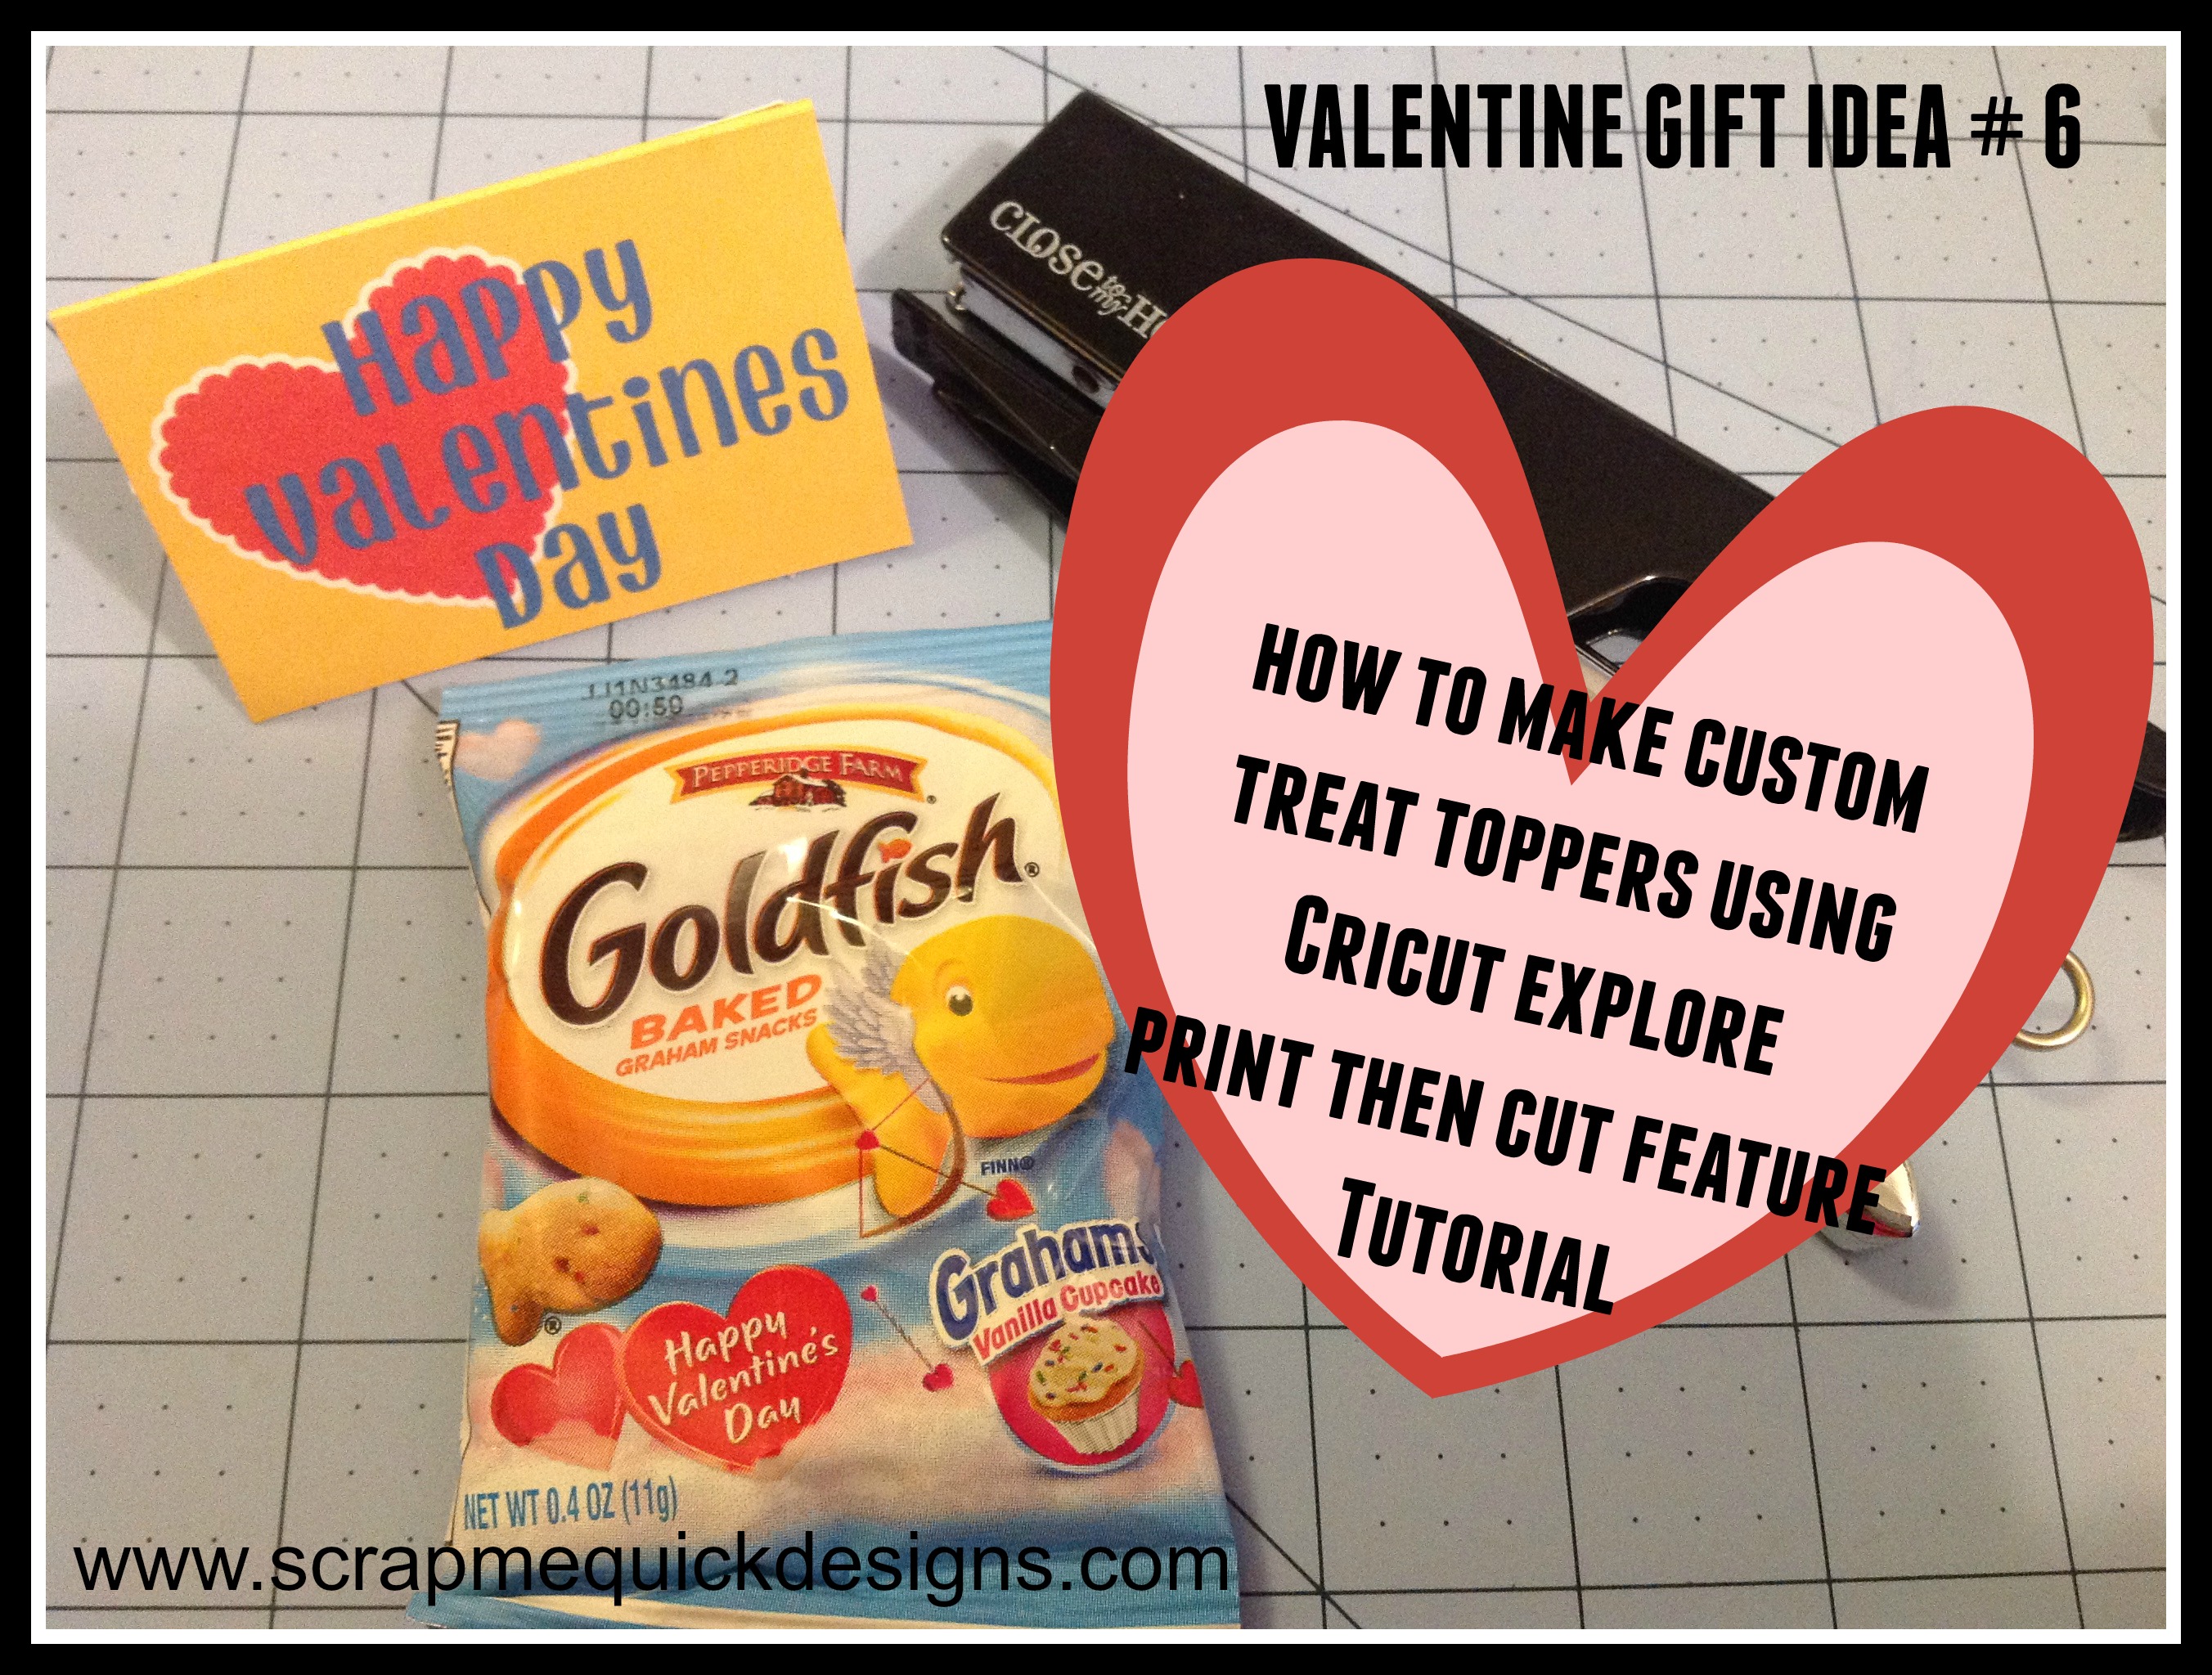 Valentine Gift Ideas #6: Custom Treat Toppers Using Print Then Cut